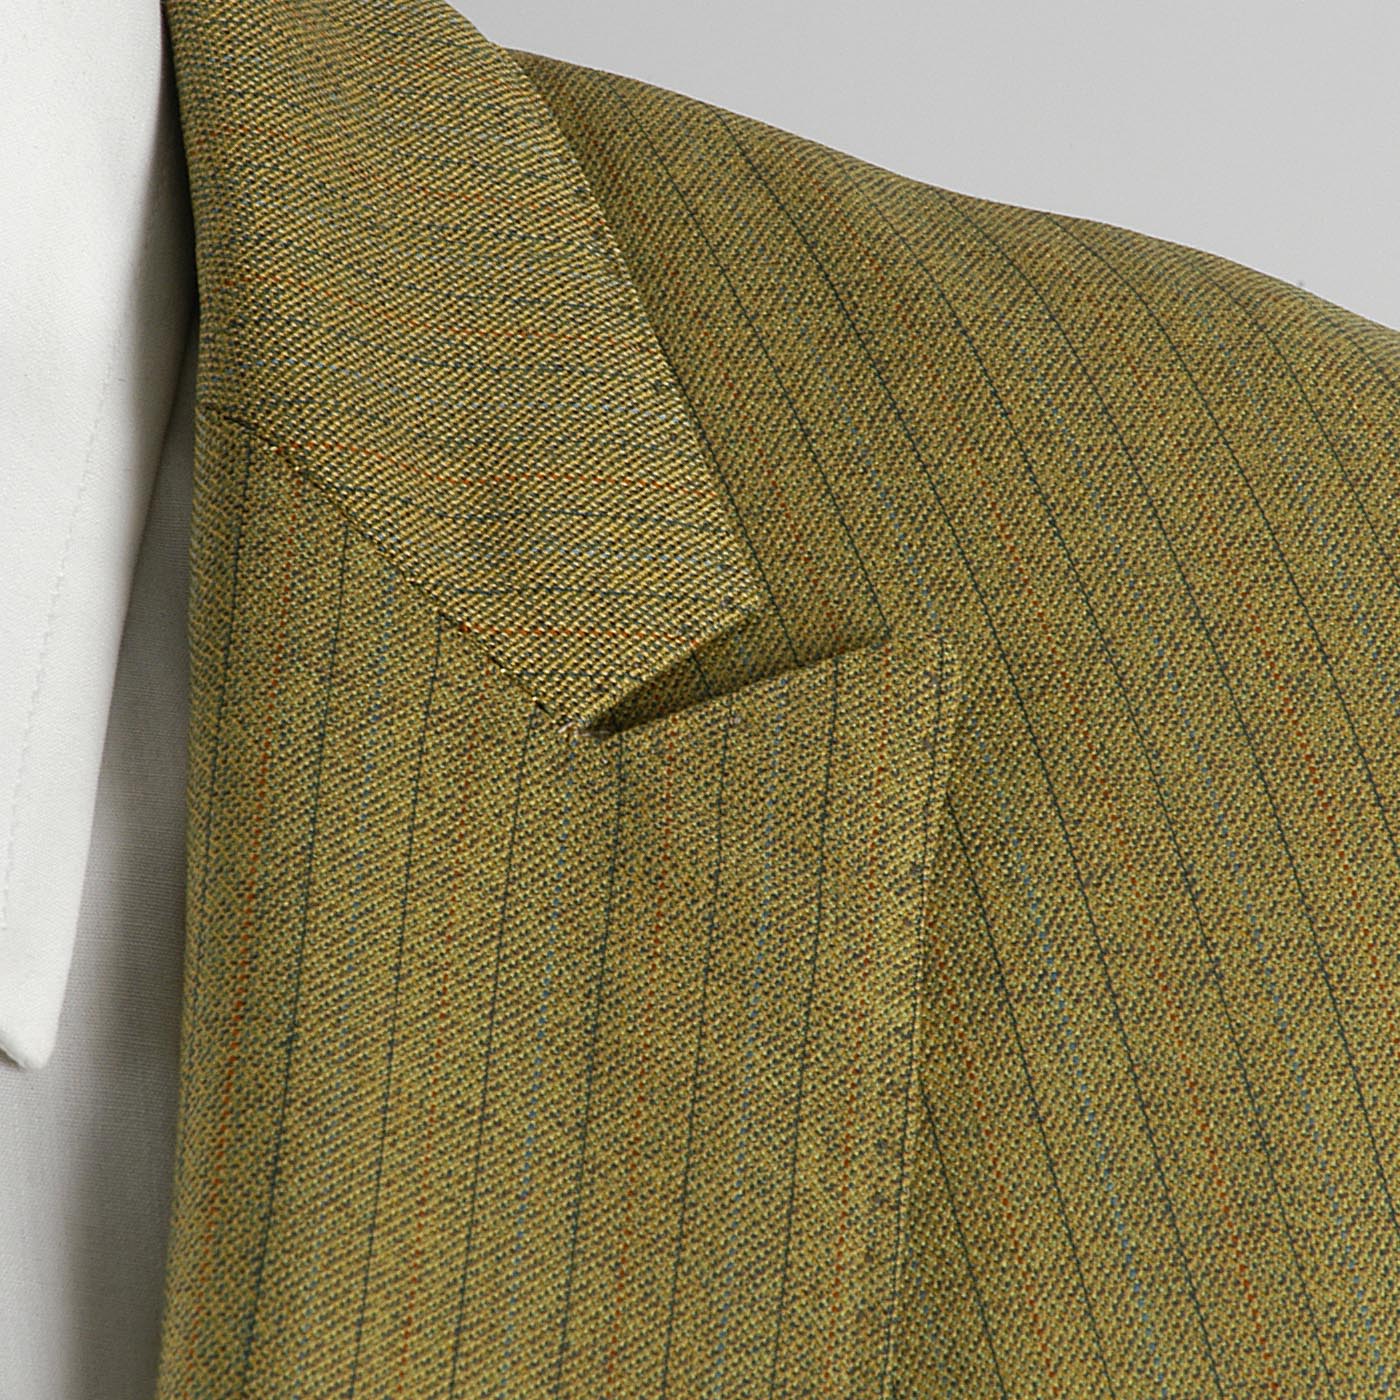 1960s Men's Bright Green Pinstripe Two Piece Suit